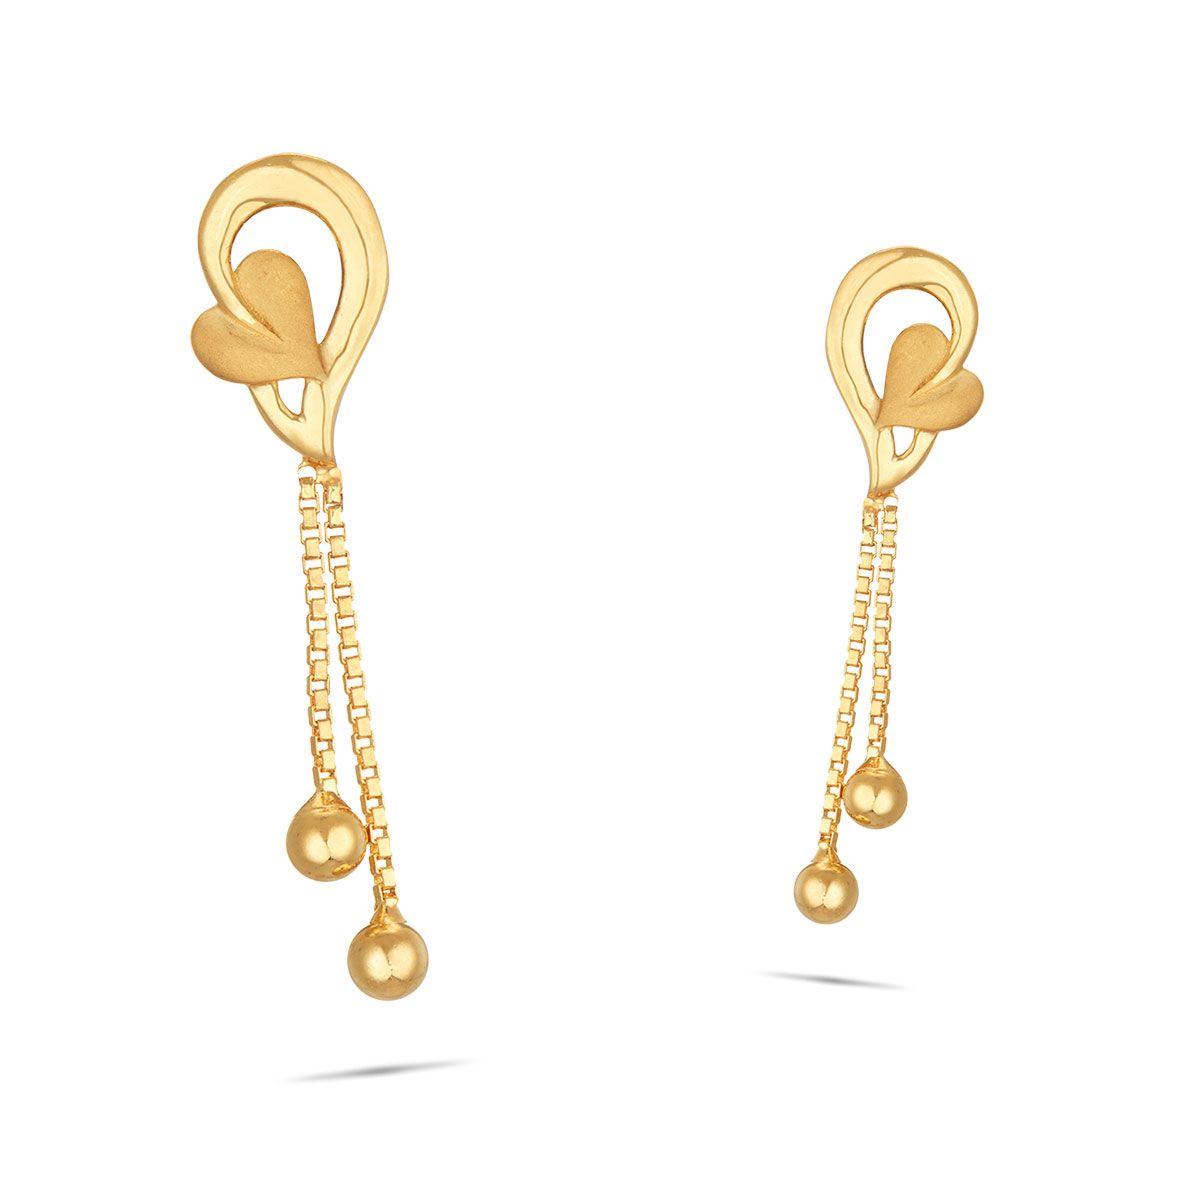 Wholesale Gold Crystal Threader Earrings - Clear Sosie Designs Jewelry